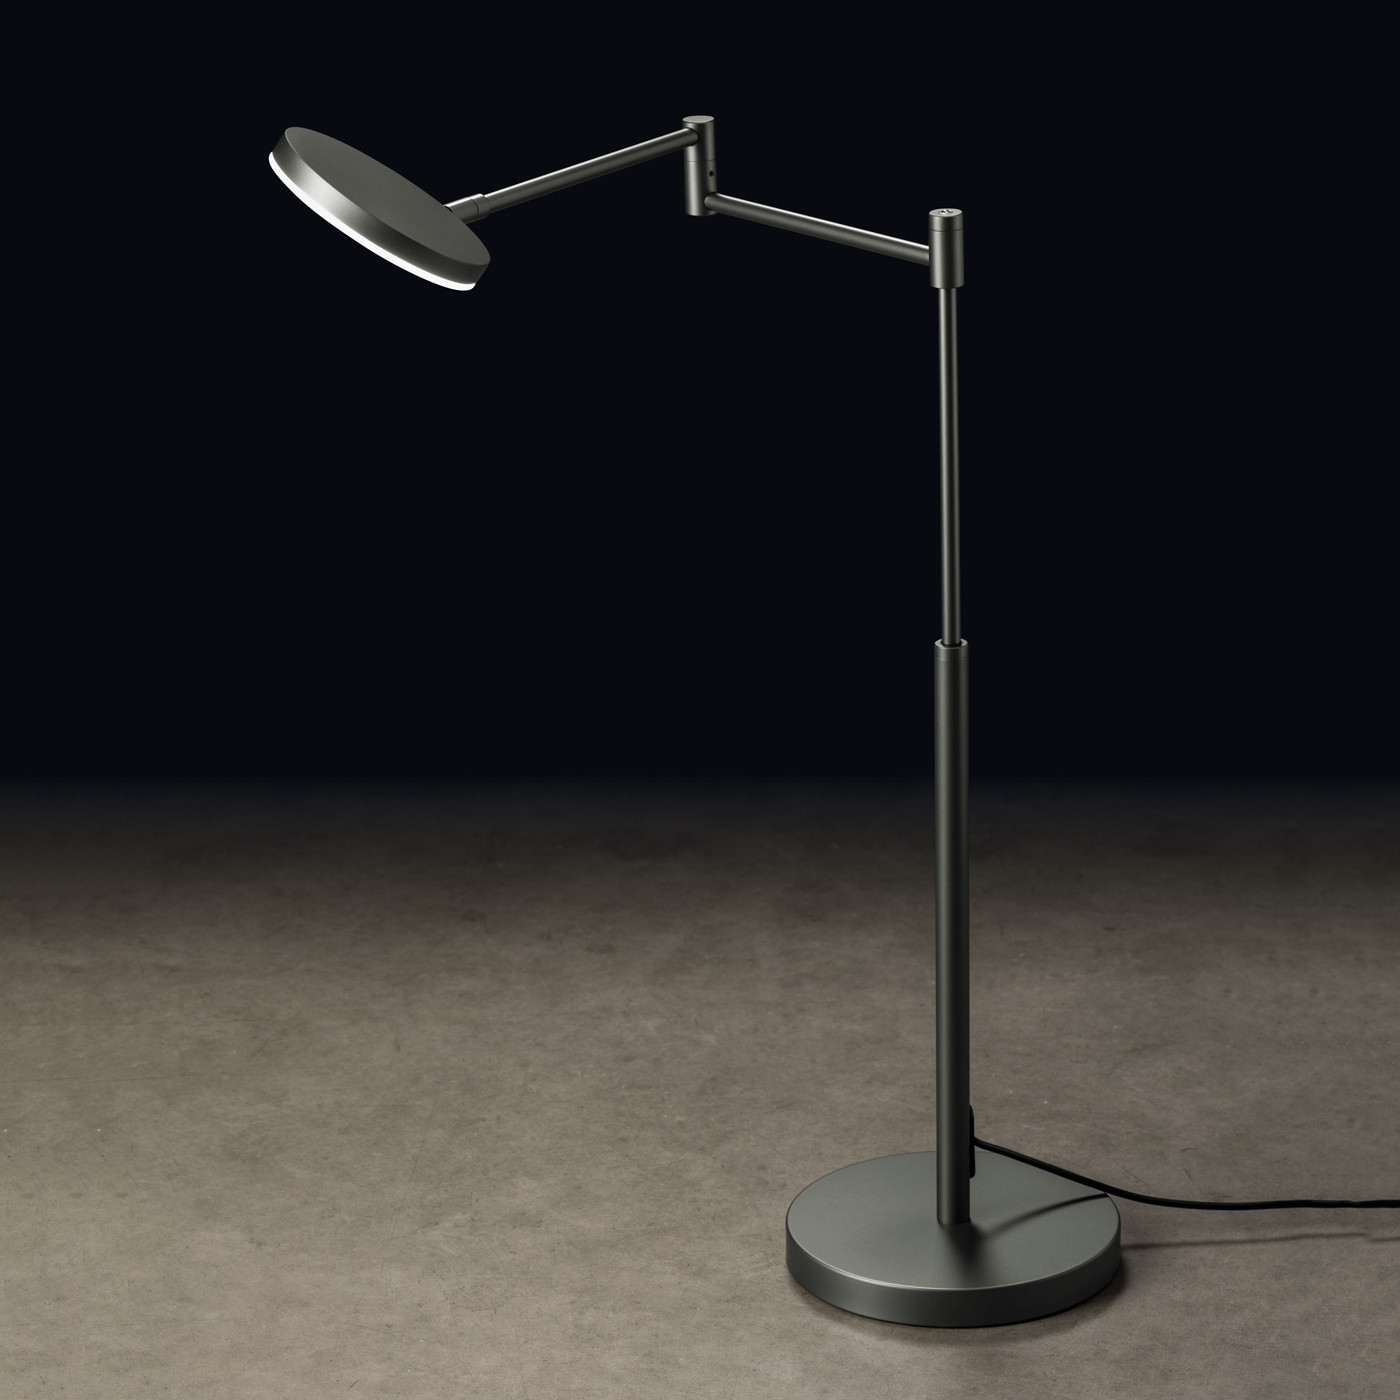 Holtkotter Plano 9657 Table Lamp At Nostraforma